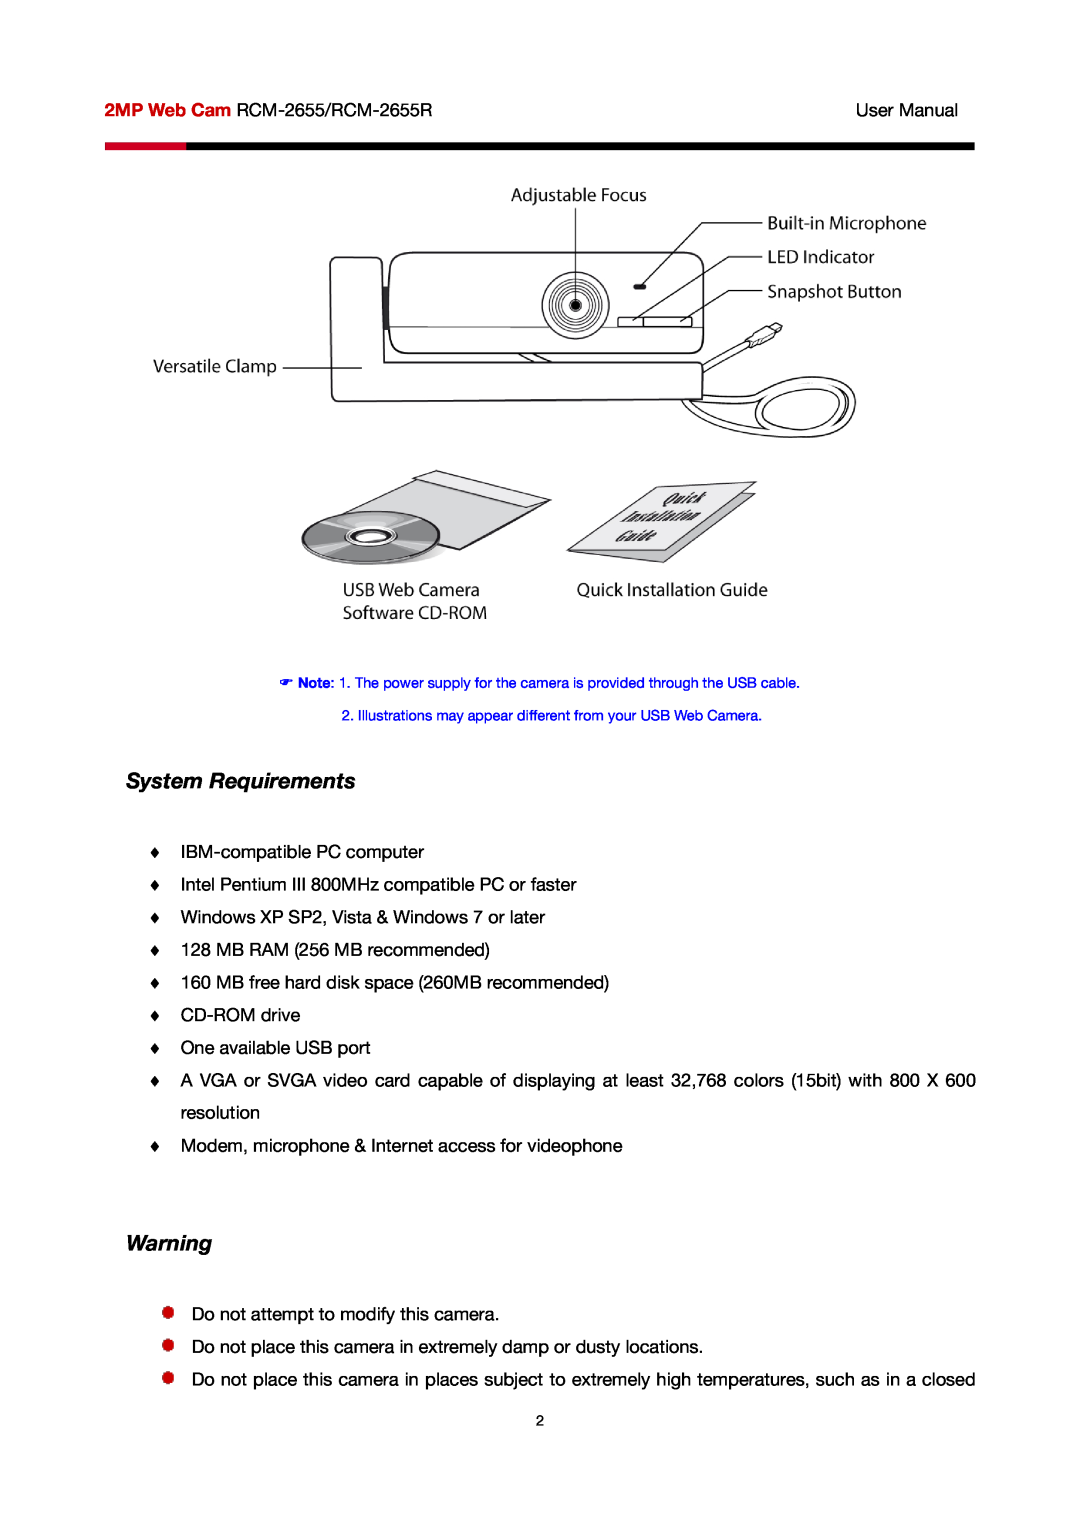 Rosewill RCM-2655R user manual System Requirements, Illustrations may appear different from your USB Web Camera 